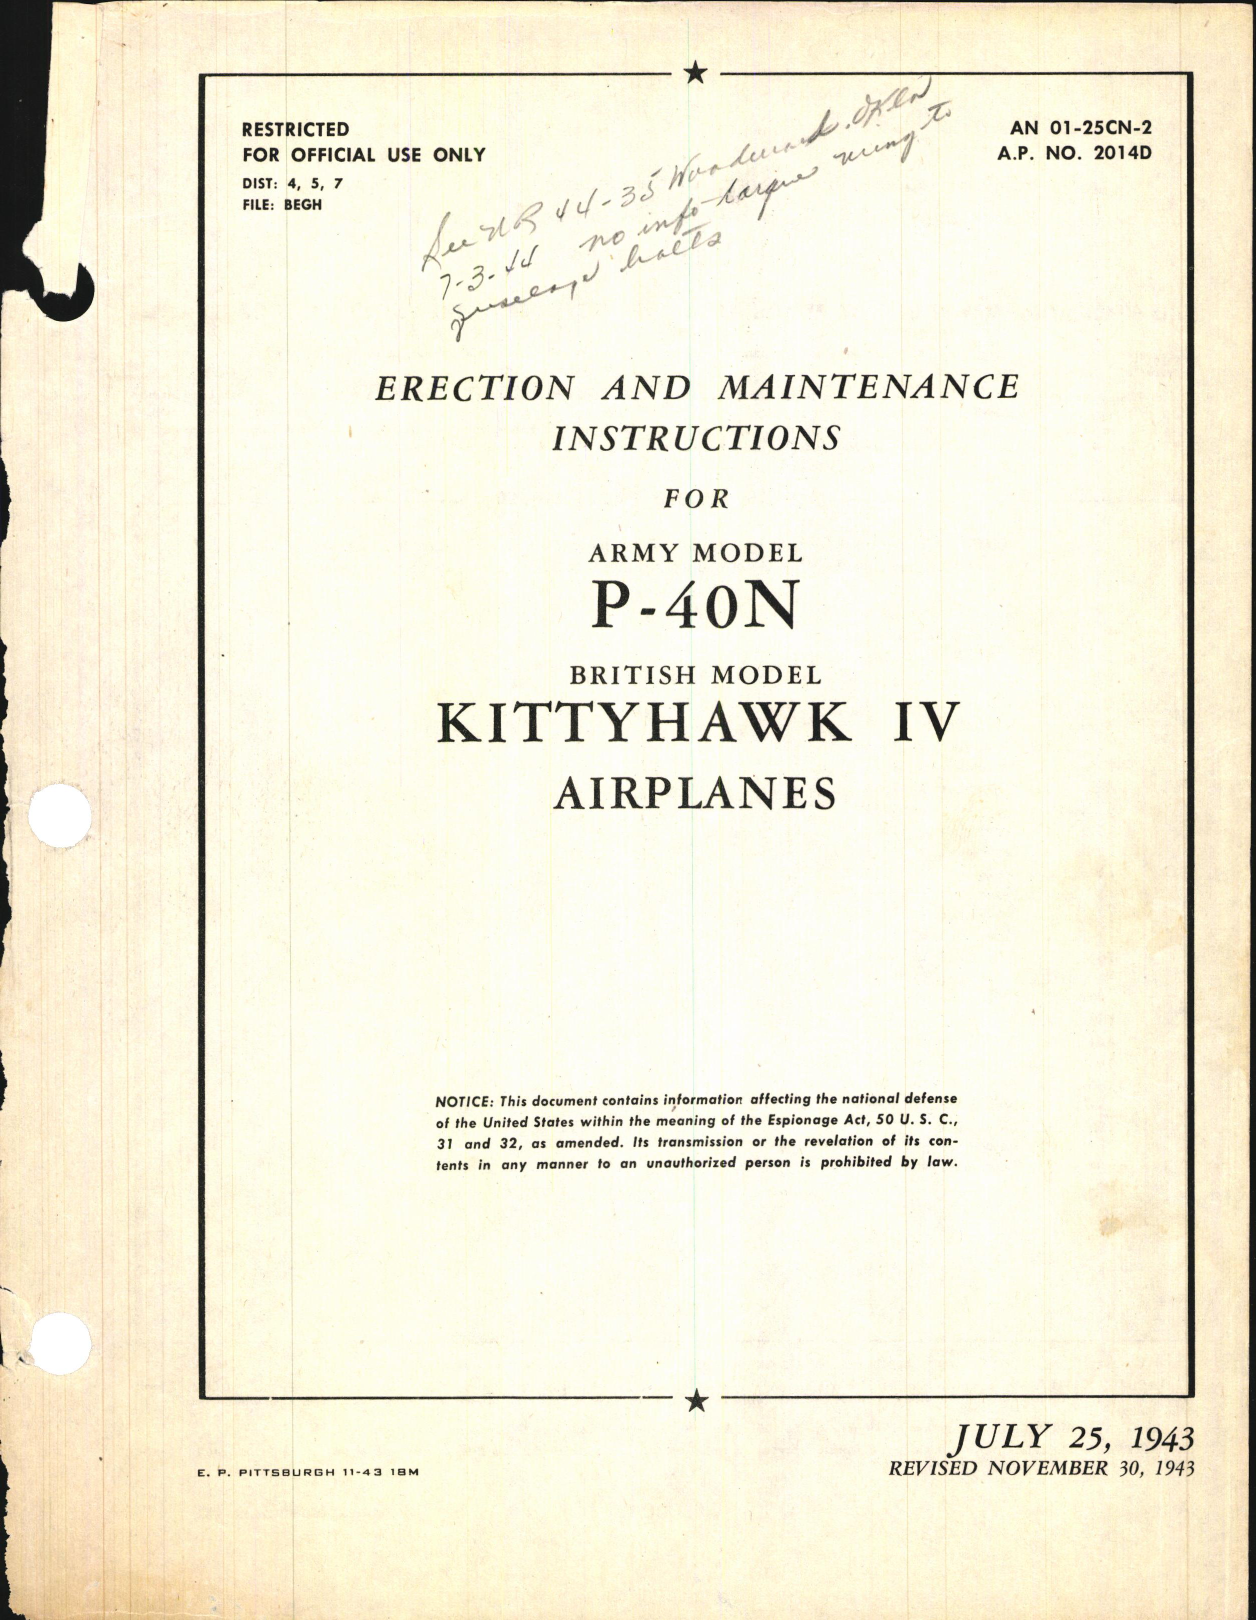 Sample page 1 from AirCorps Library document: Erection & Maintenance Instructions for P-40N Series, Kittyhawk IV